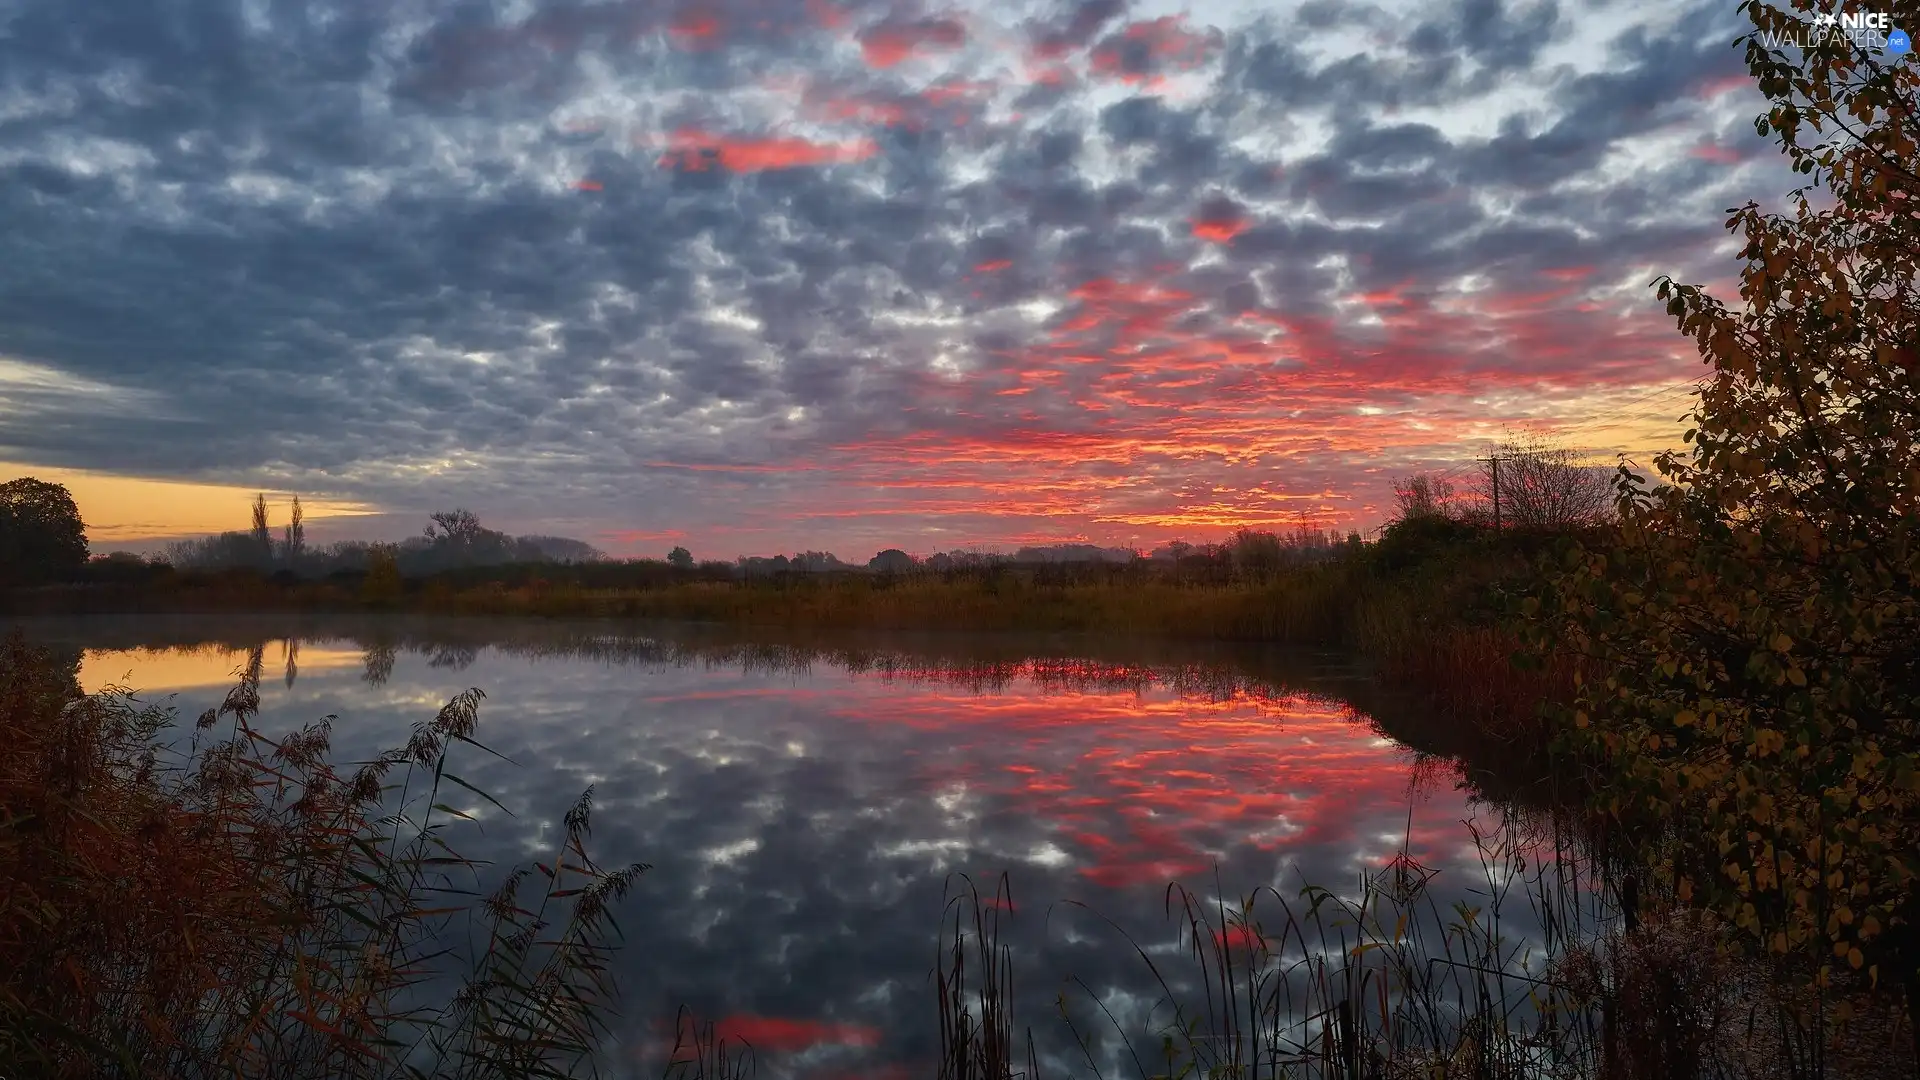 viewes, Sunrise, color, rushes, Sky, Pond - car, clouds, reflection, Plants, trees